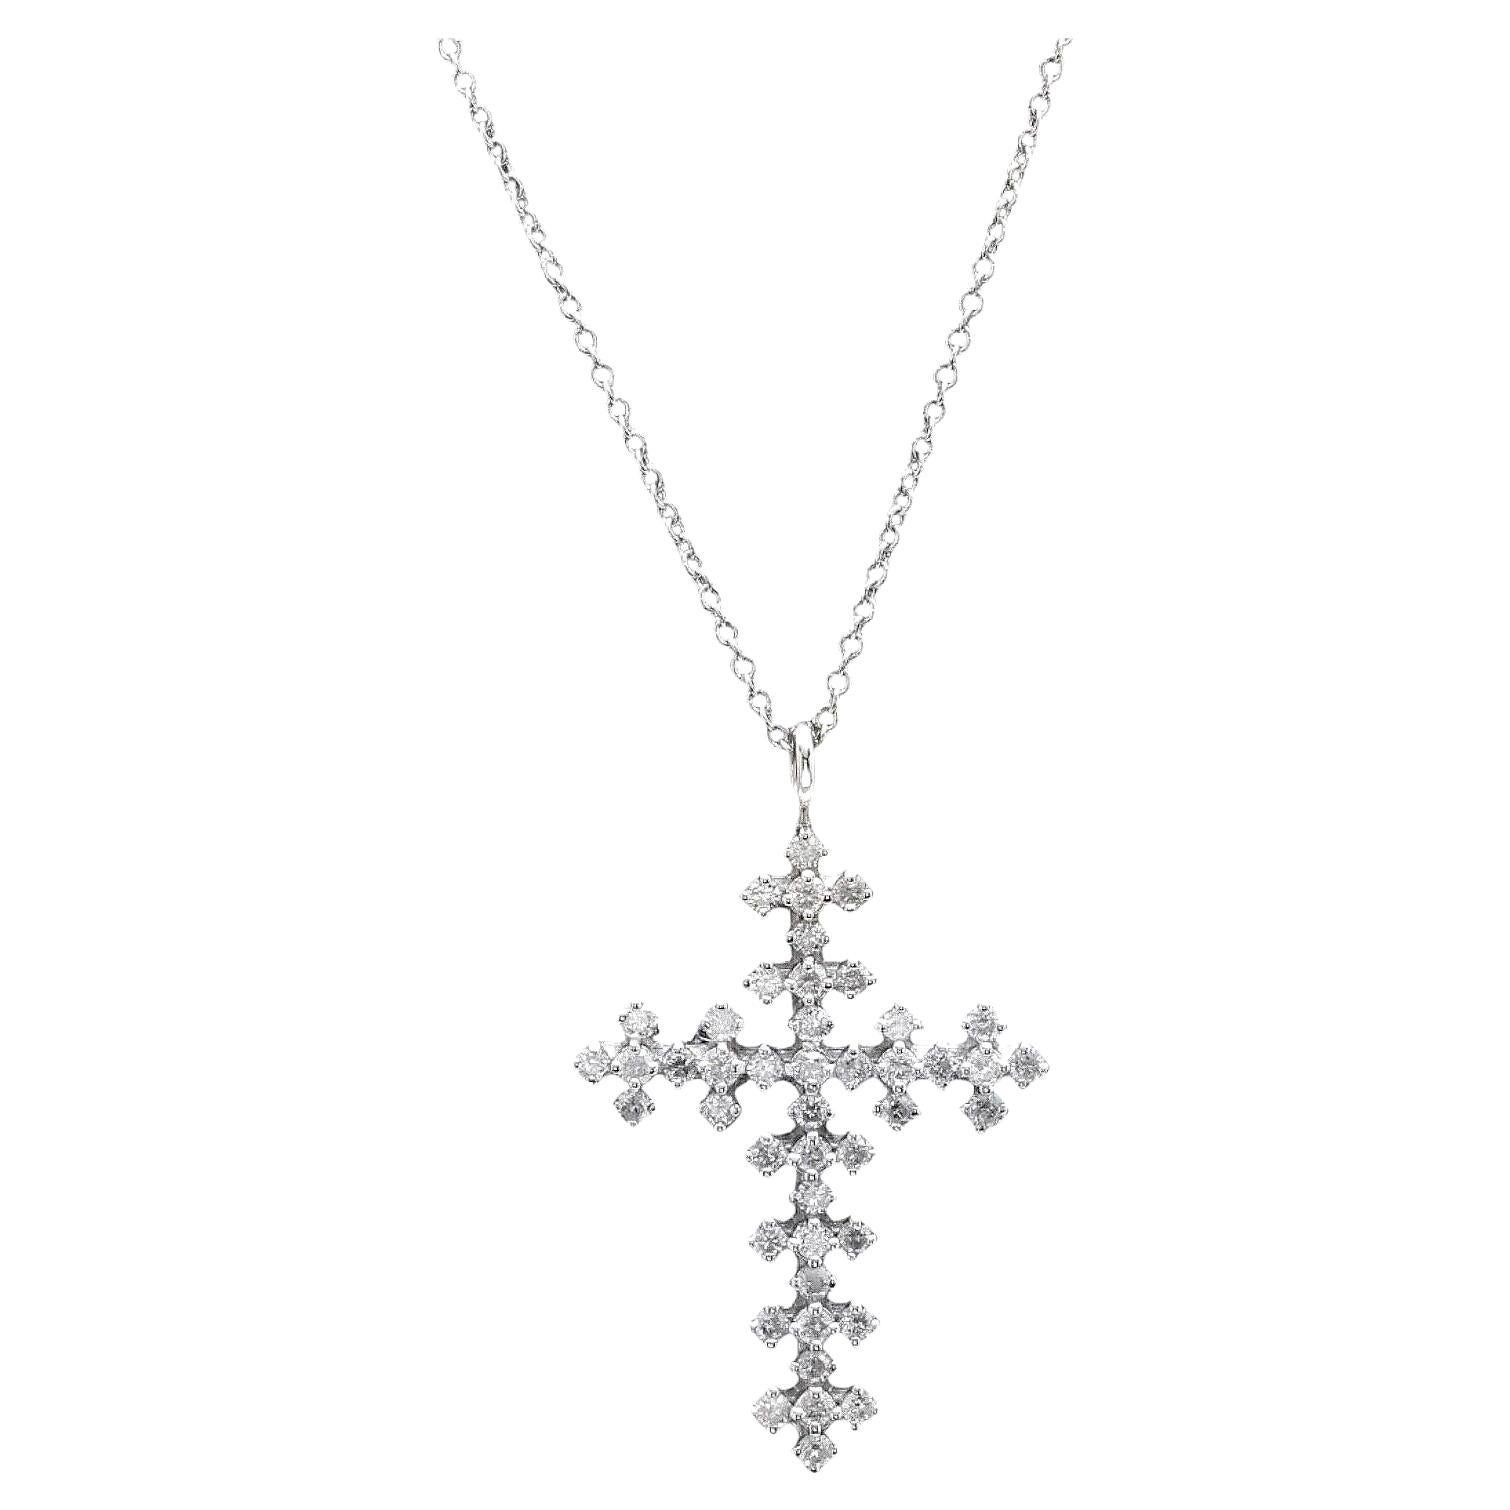 1.10Ct Stunning 14K Solid White Gold Diamond Cross Pendant Necklace For Sale